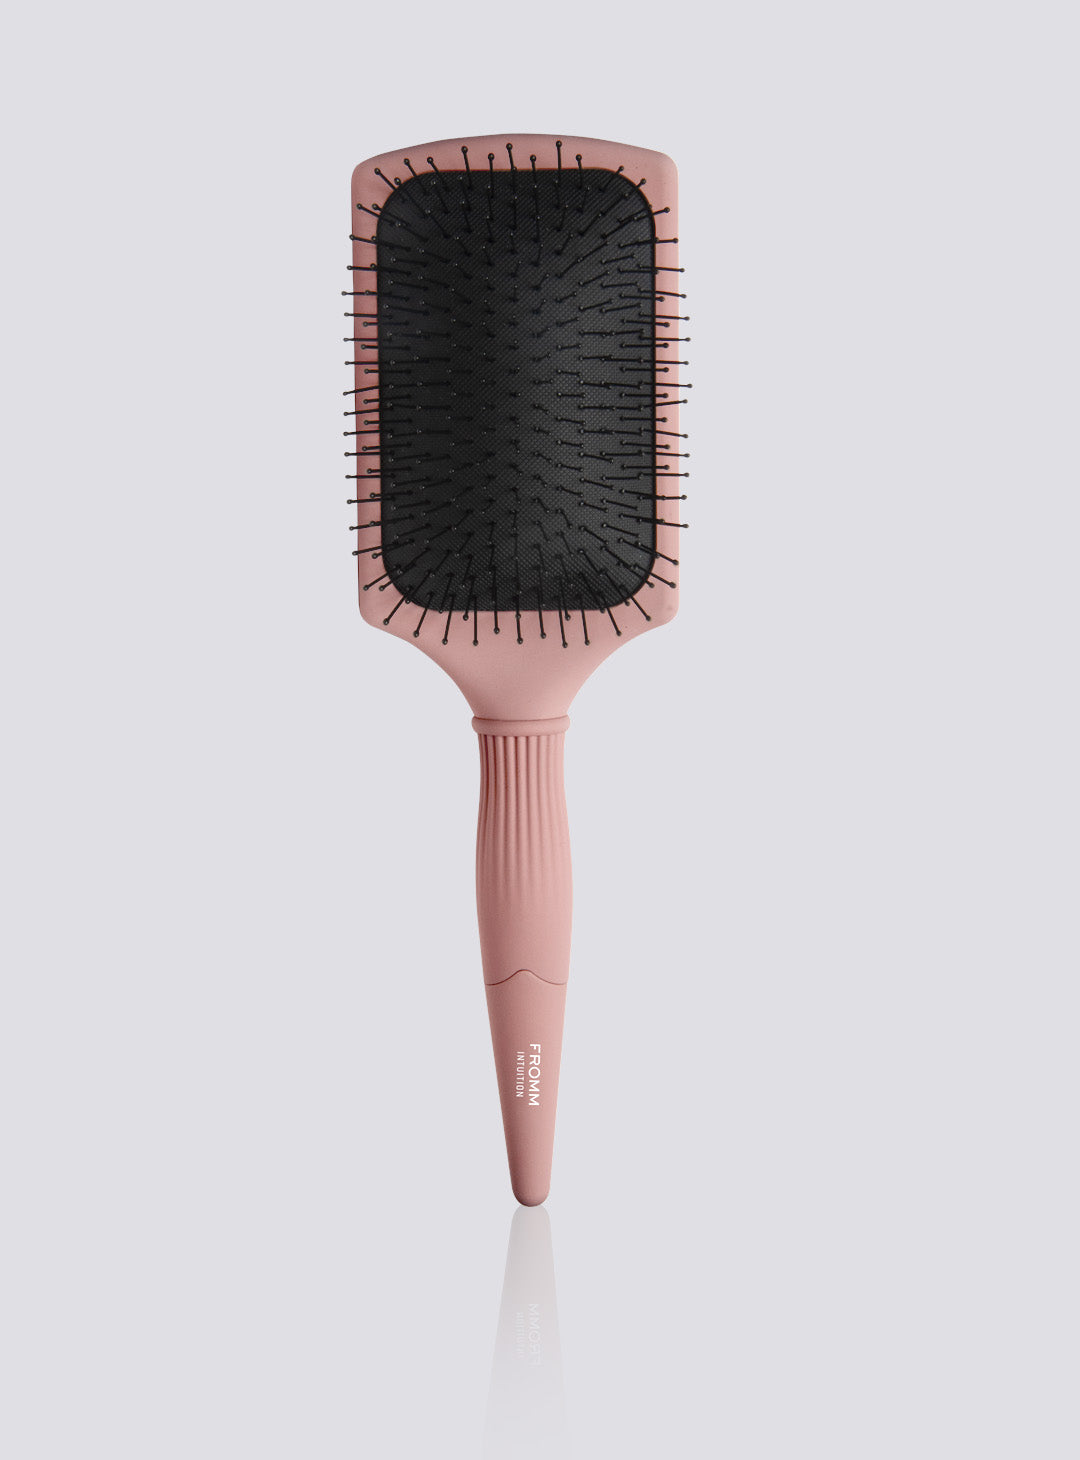 INTUITION FLEXER VENT BRUSH used for Wet detangling and Breaking up curls